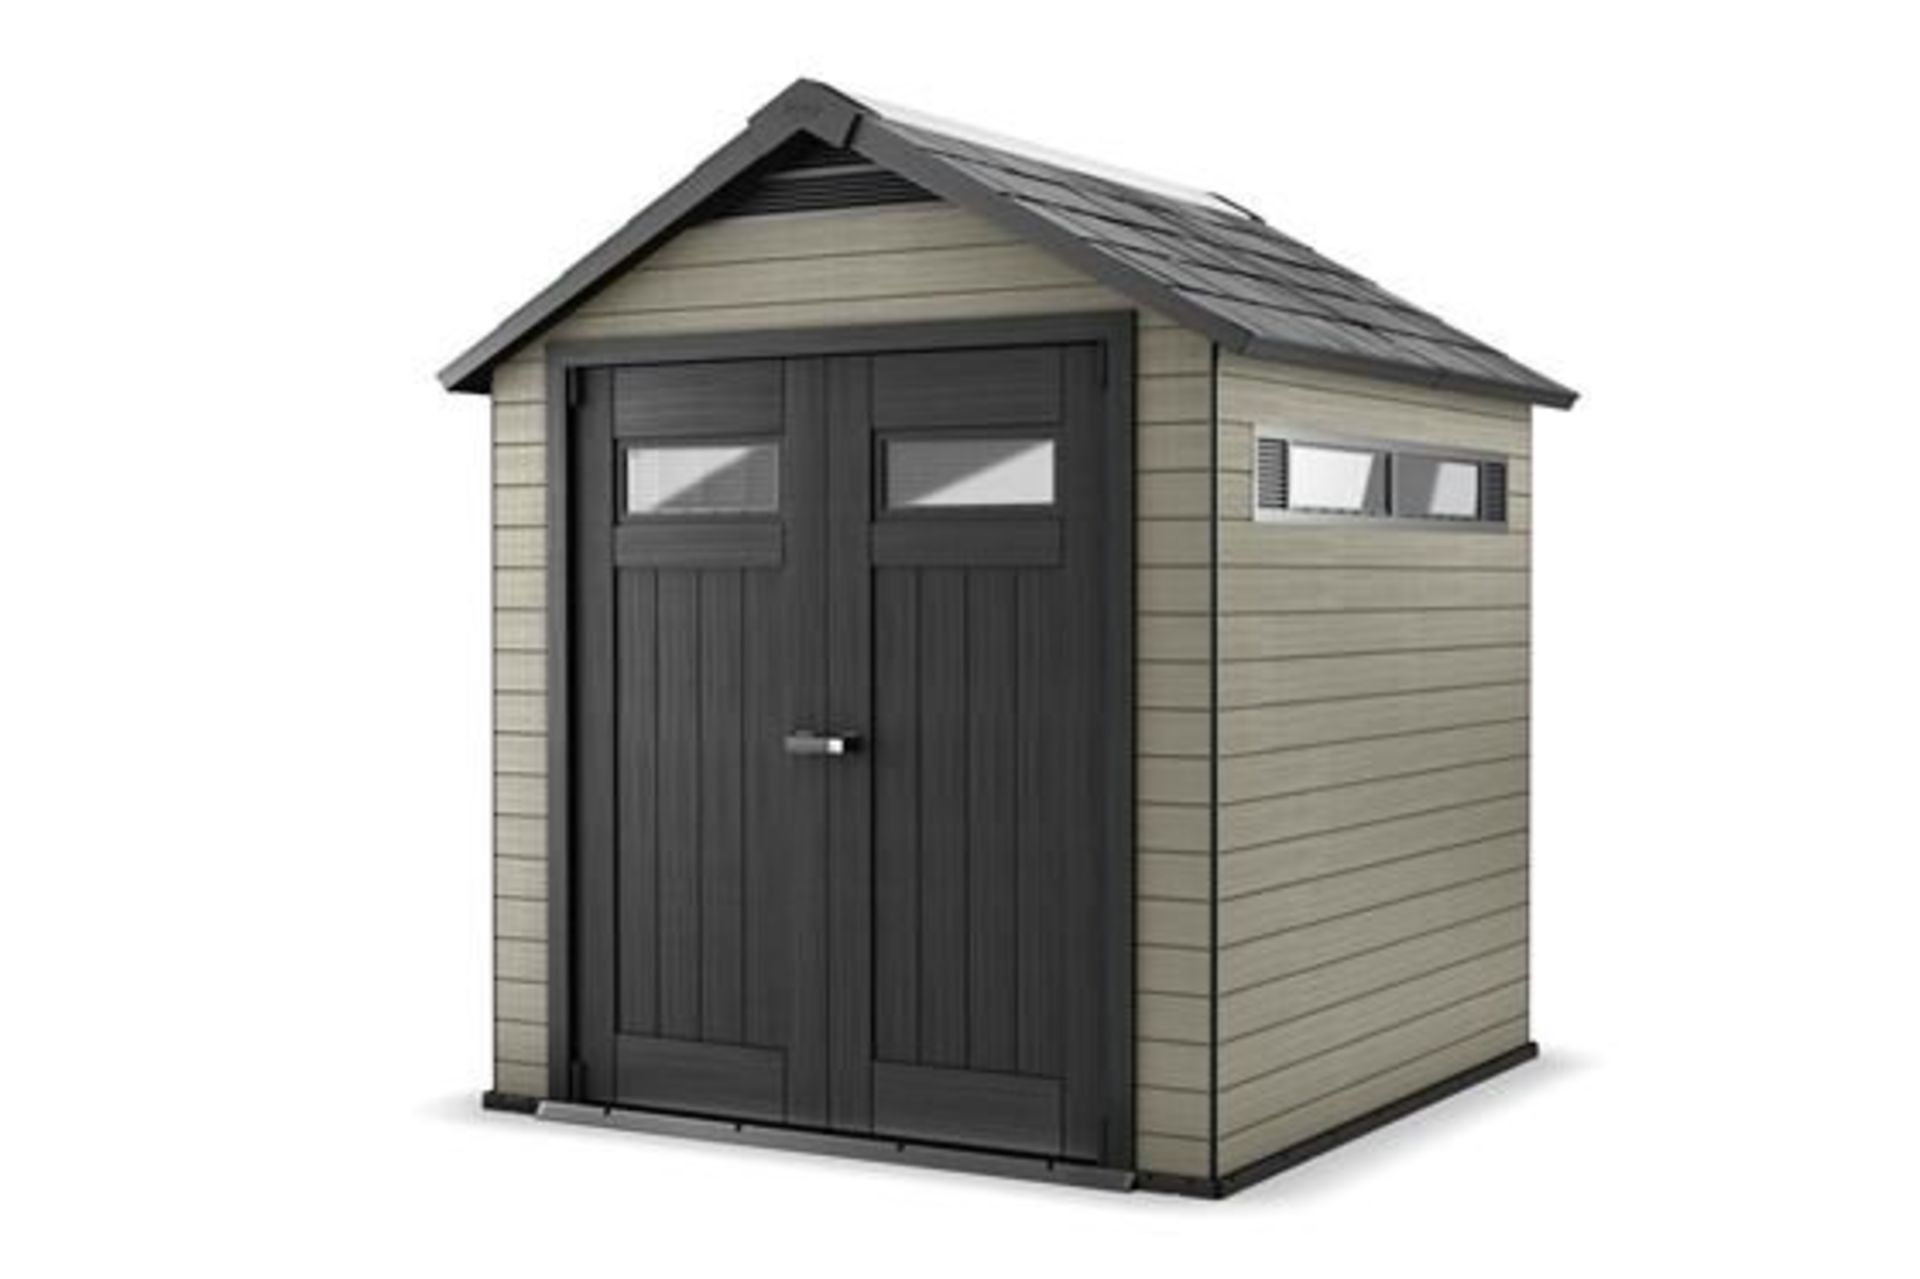 Keter Fusion 757 Garden Shed - Image 2 of 3